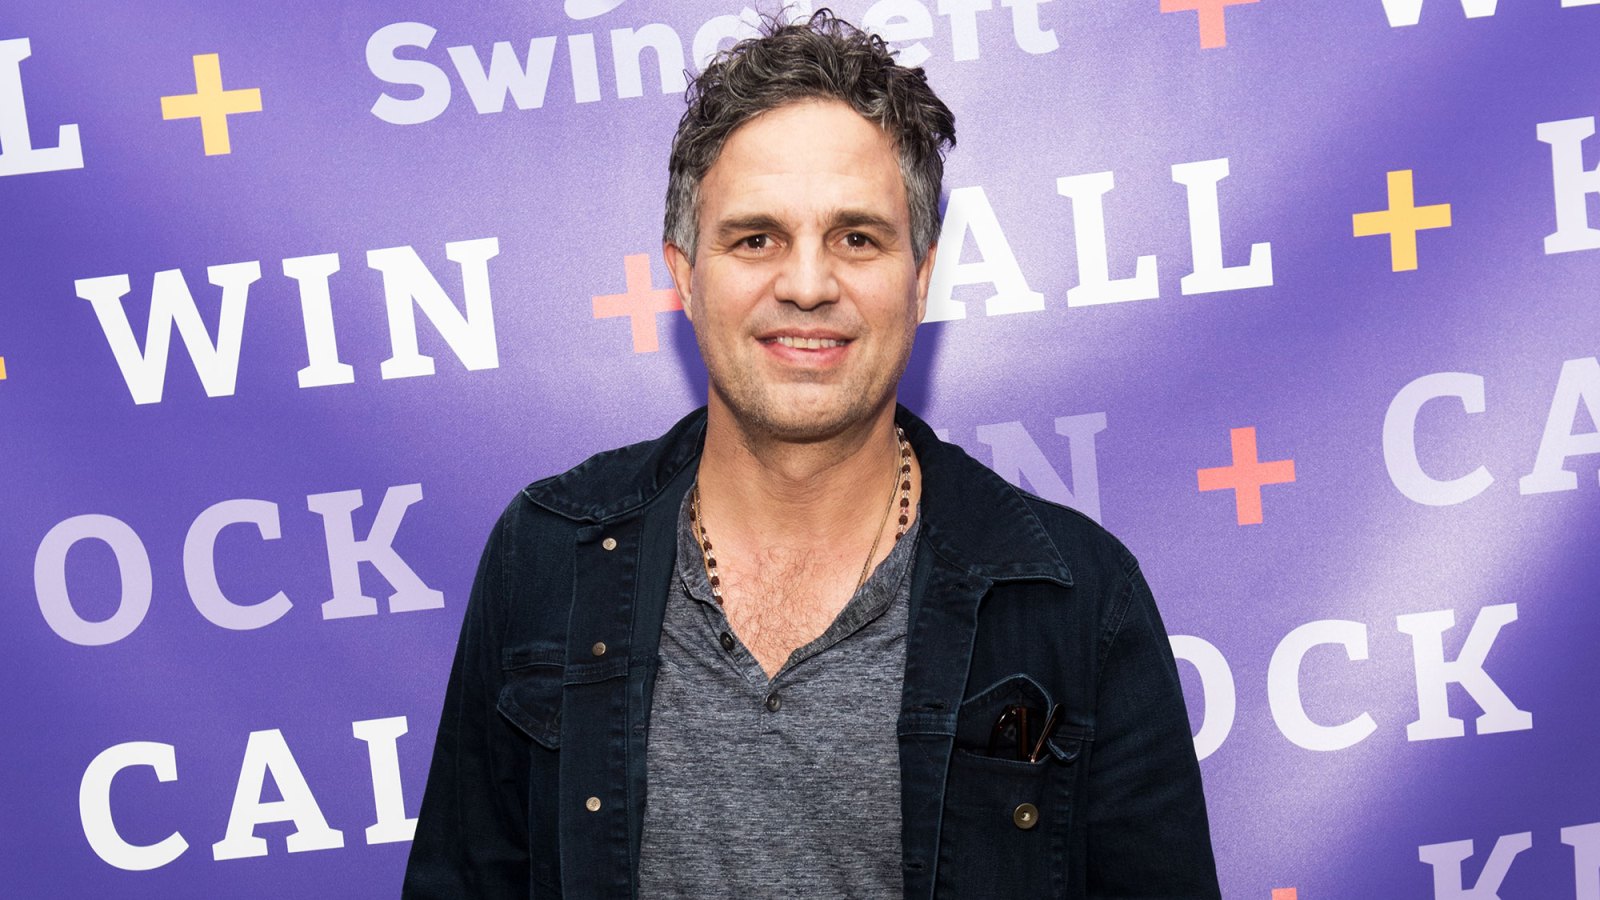 Mark Ruffalo Gives Away $100 Starbucks Gift Card to Encourage Others to Pay it Forward